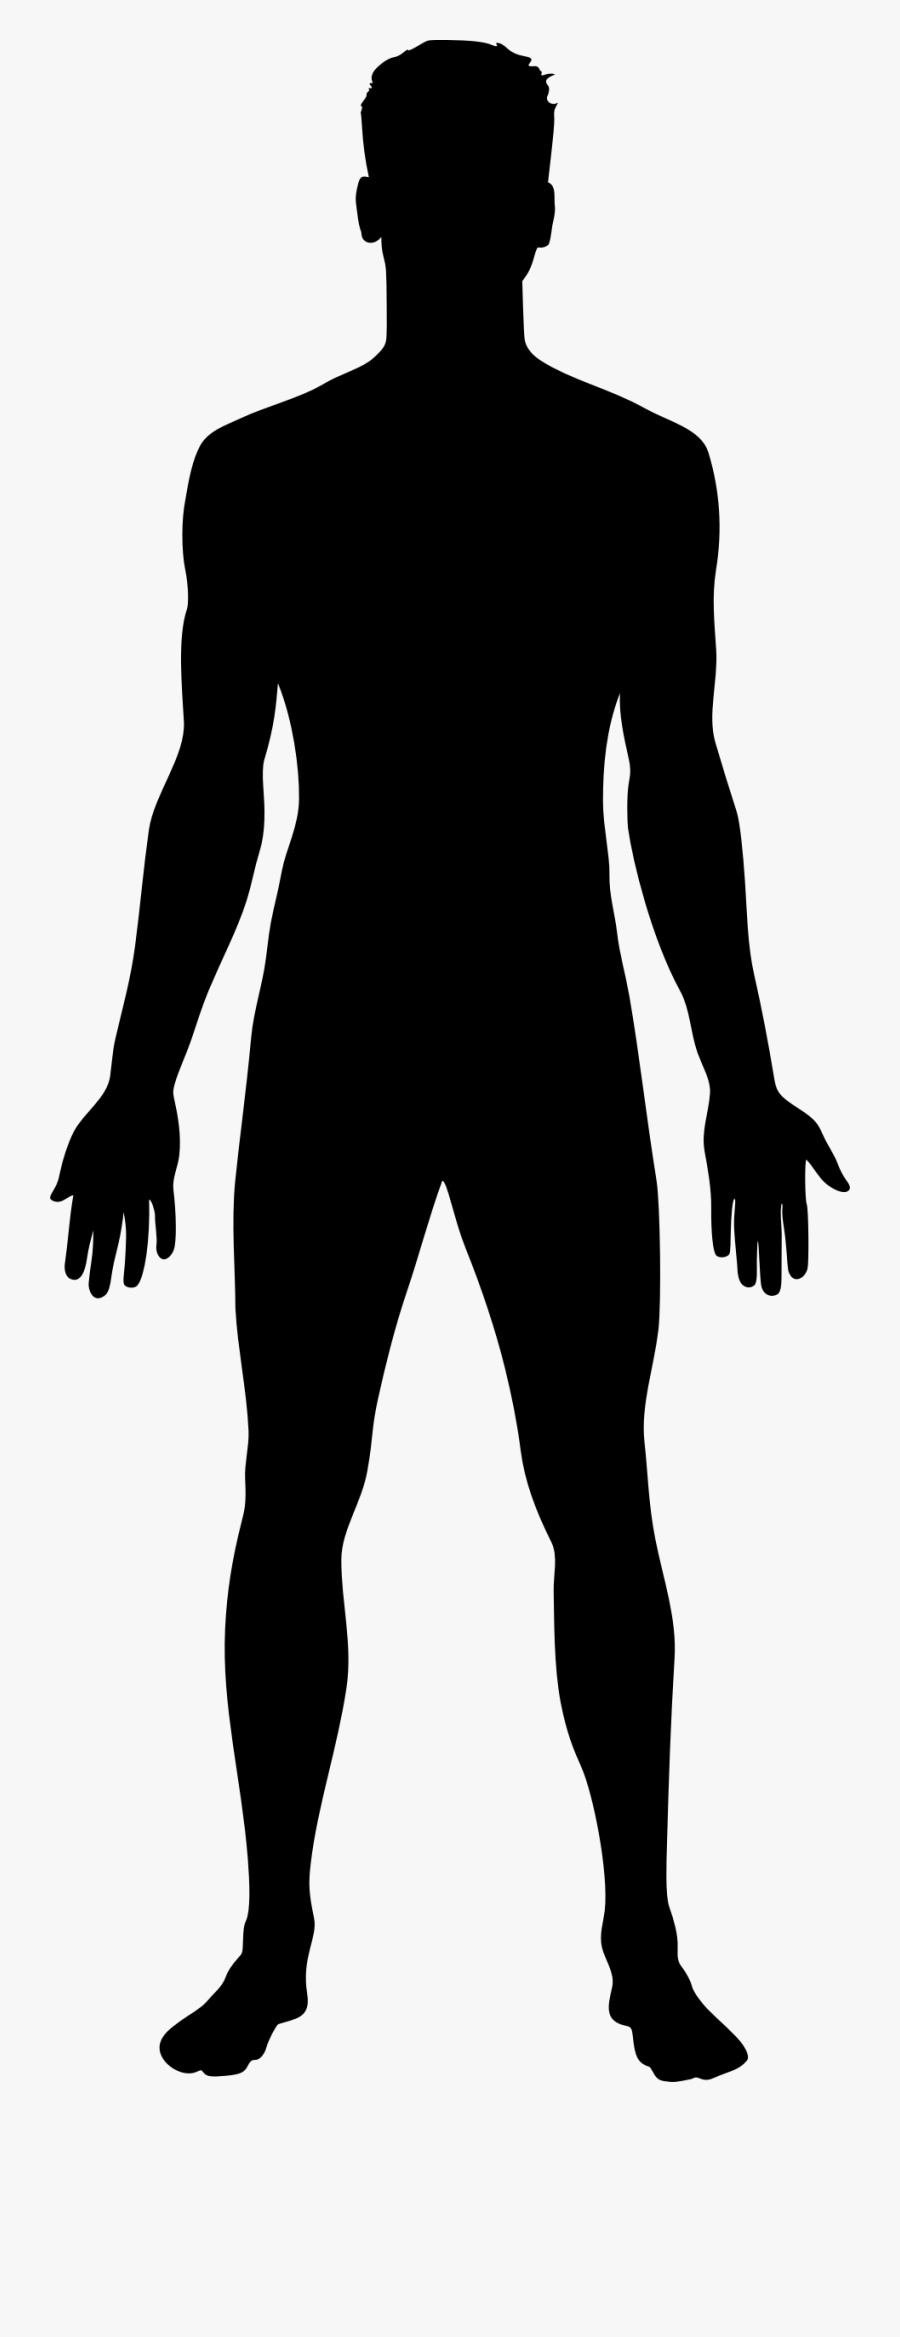 Male Clipart Male Outline - Human Body Silhouette Png, Transparent Clipart